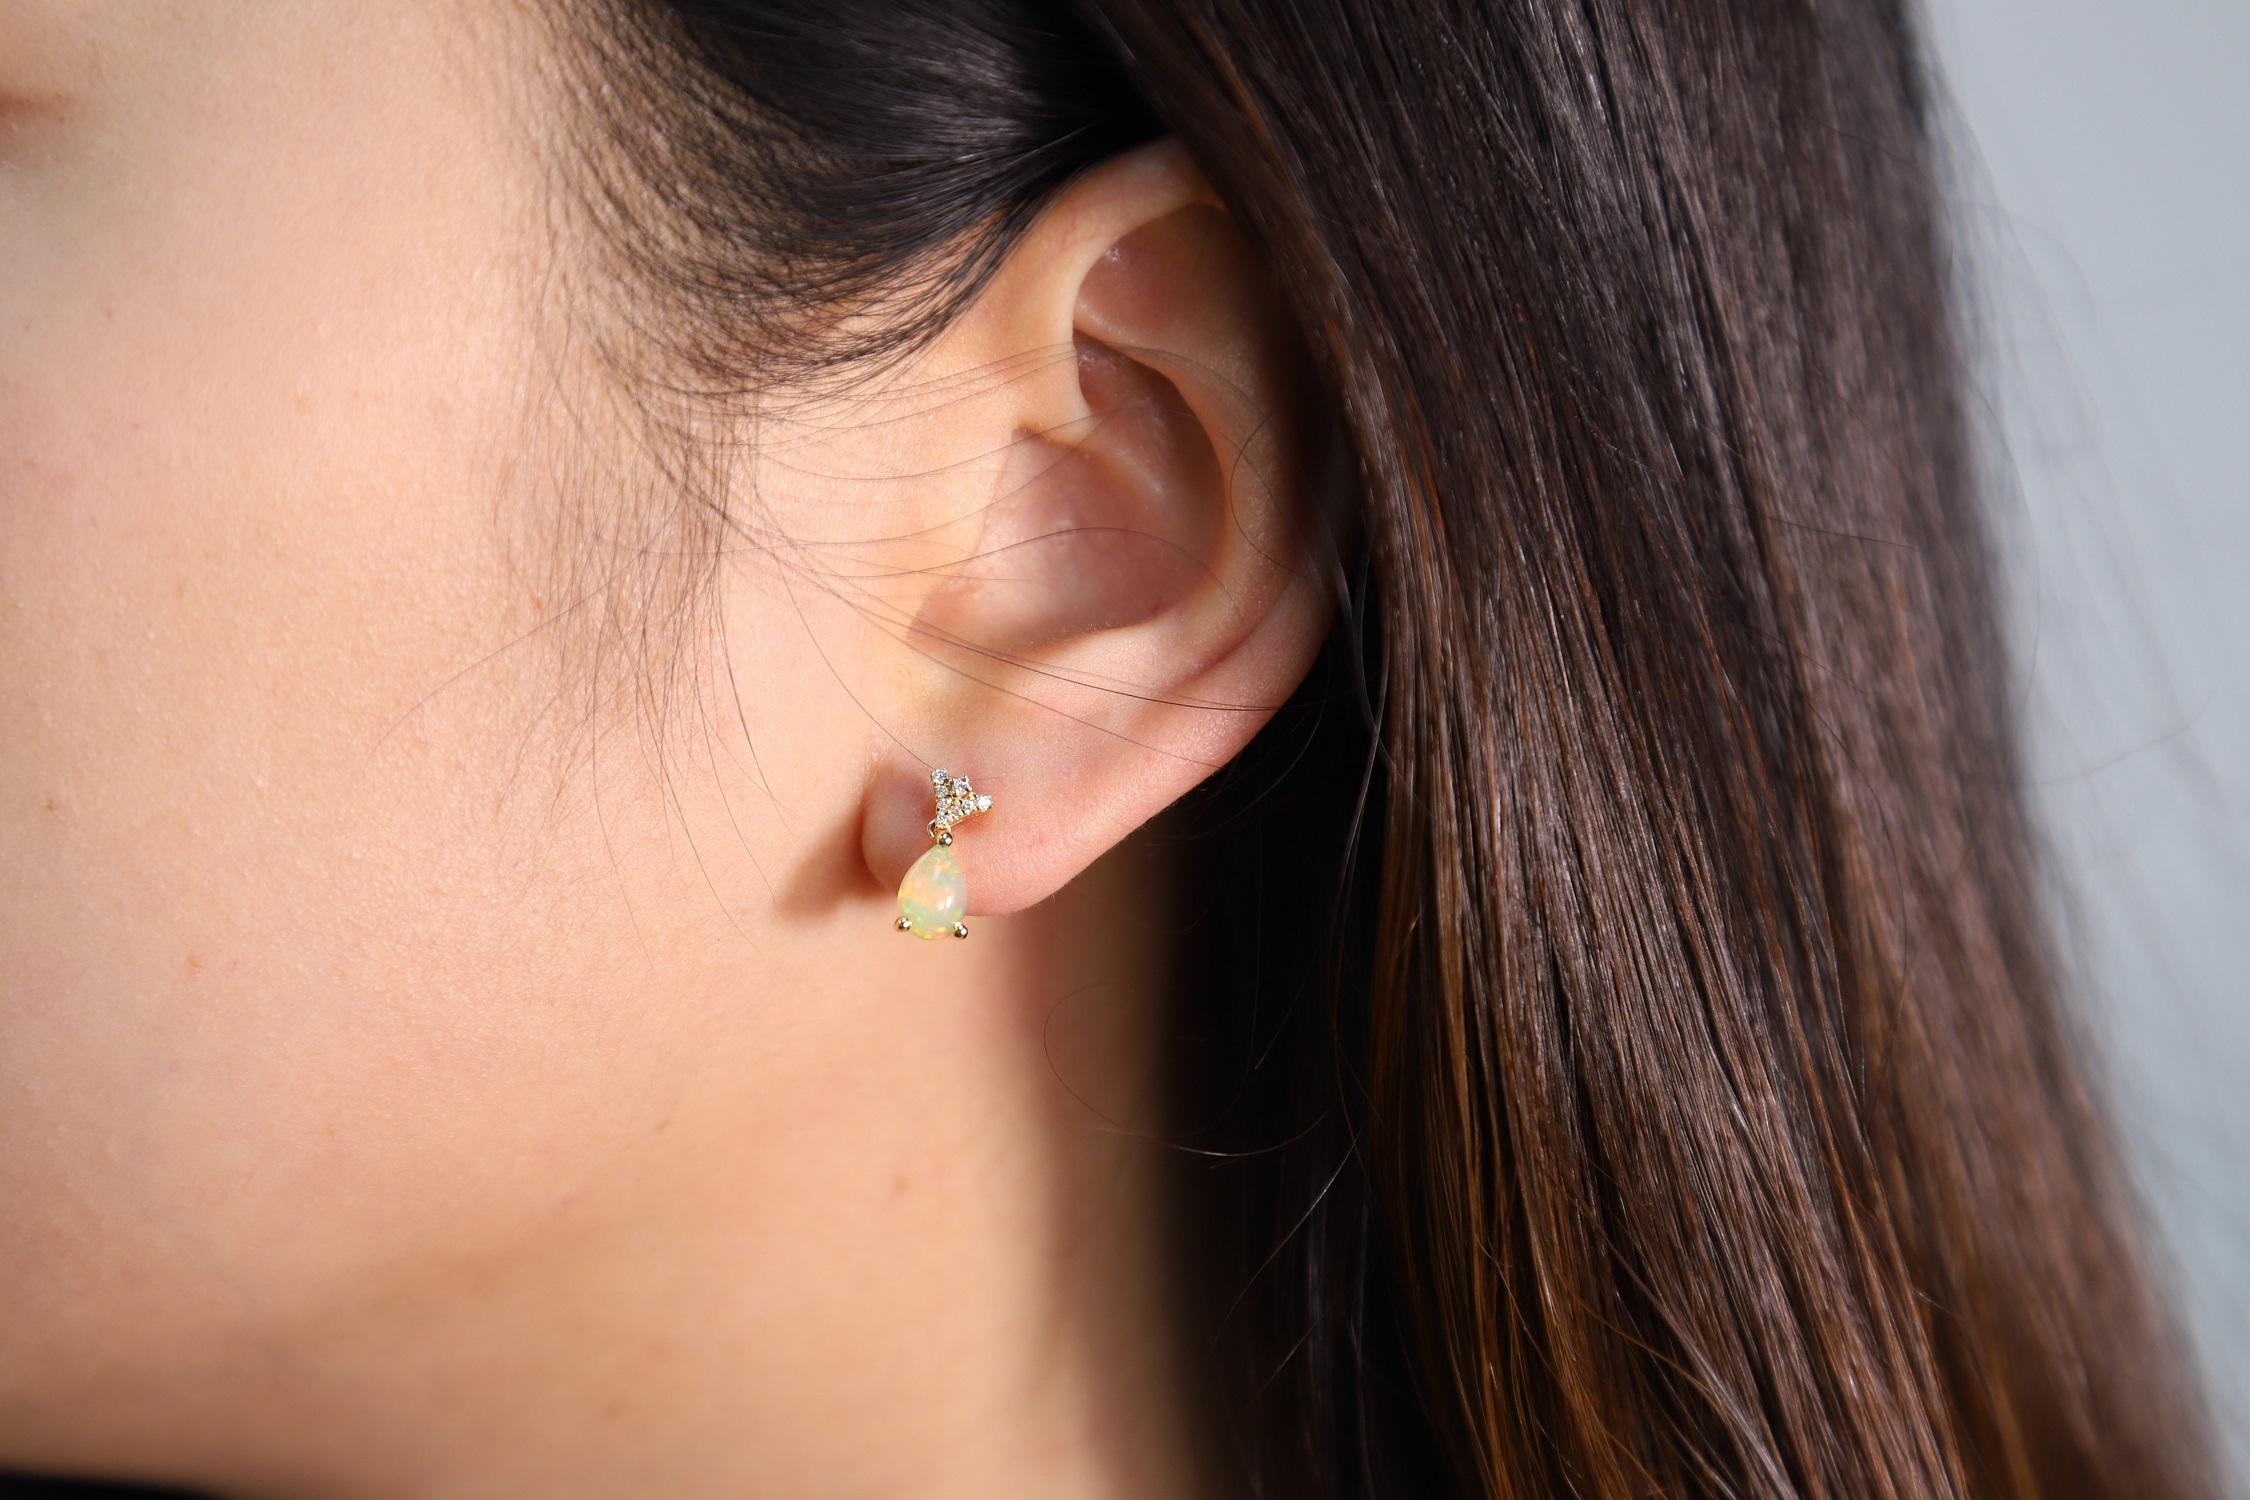 Stunning, timeless and classy eternity Unique Earring. Decorate yourself in luxury with this Gin & Grace Earring. The 14k Yellow Gold jewelry boasts 7x5 Pear Cab Prong Setting Genuine Ethiopian Opal (2 pcs) 0.91 Carat, along with Natural Round cut